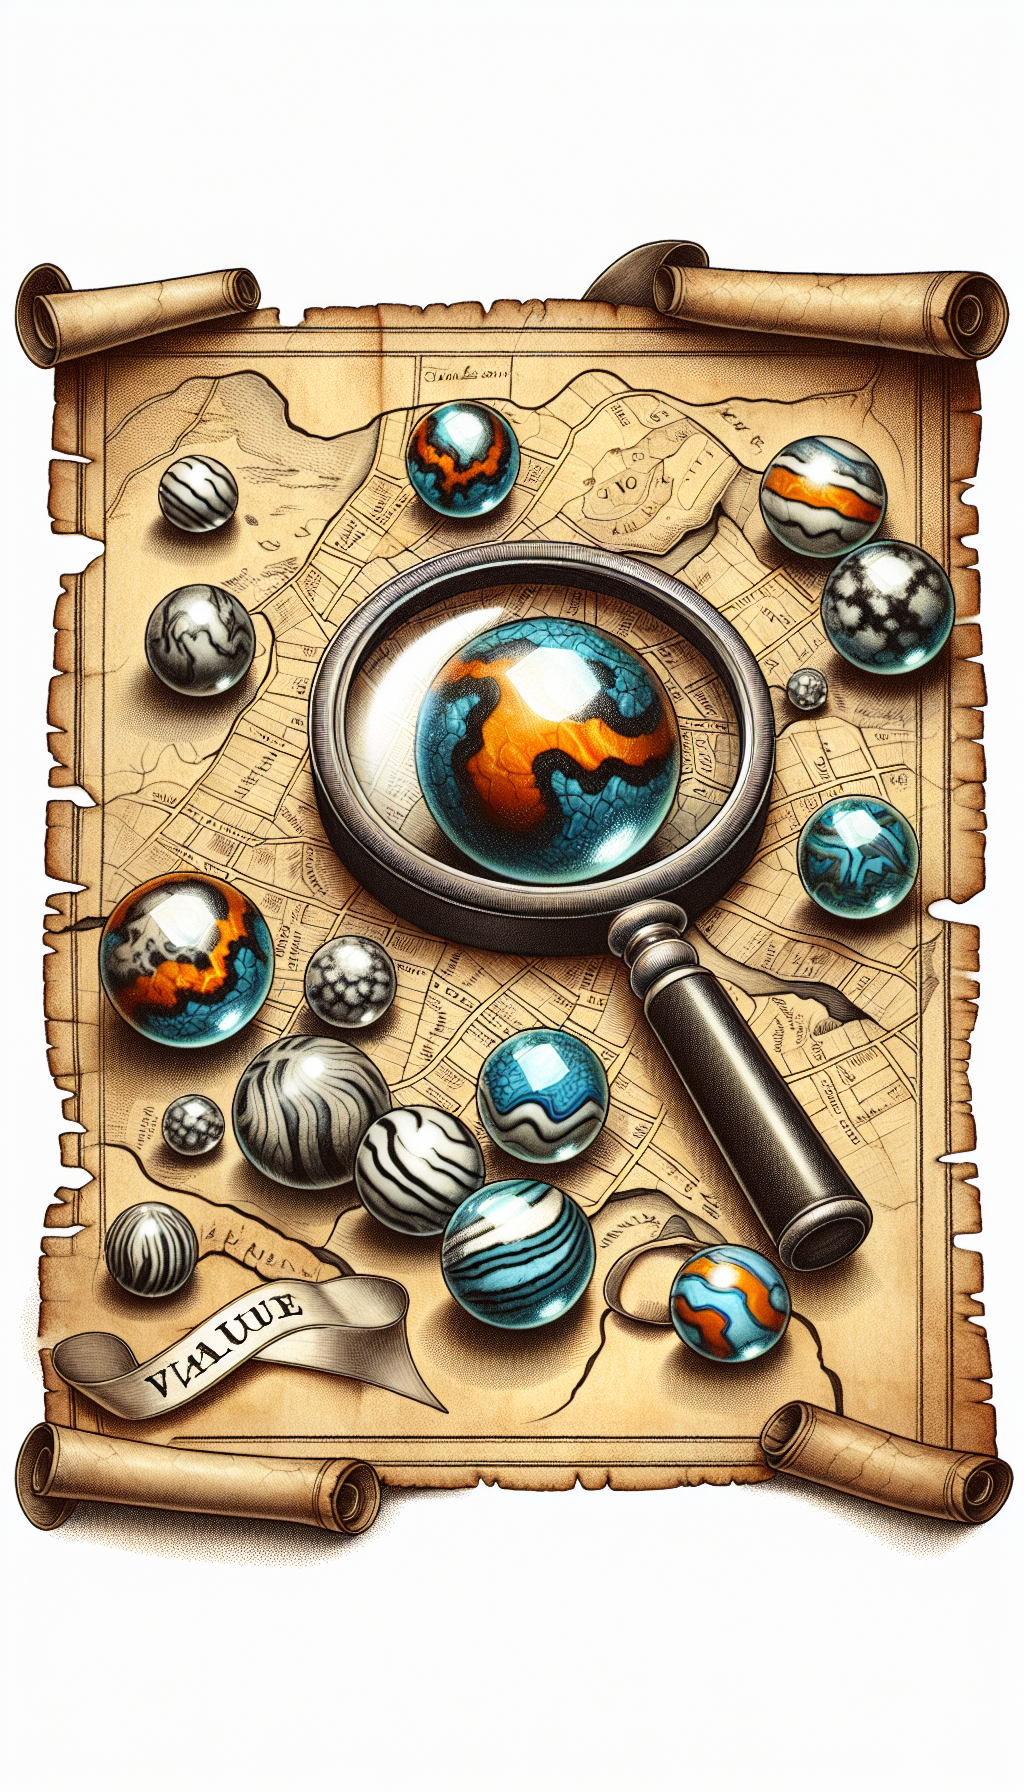 A magnifying glass looms over a treasure map, where various antique marbles are marked as destinations. Each marble glistens with distinct patterns and colors, resembling precious gems. A ribbon labeled "Value" twists around them, highlighting their rarity and worth. The styles range from lifelike realism for the marbles, to an inked caricature for the map, fusing historical allure with whimsical charm.